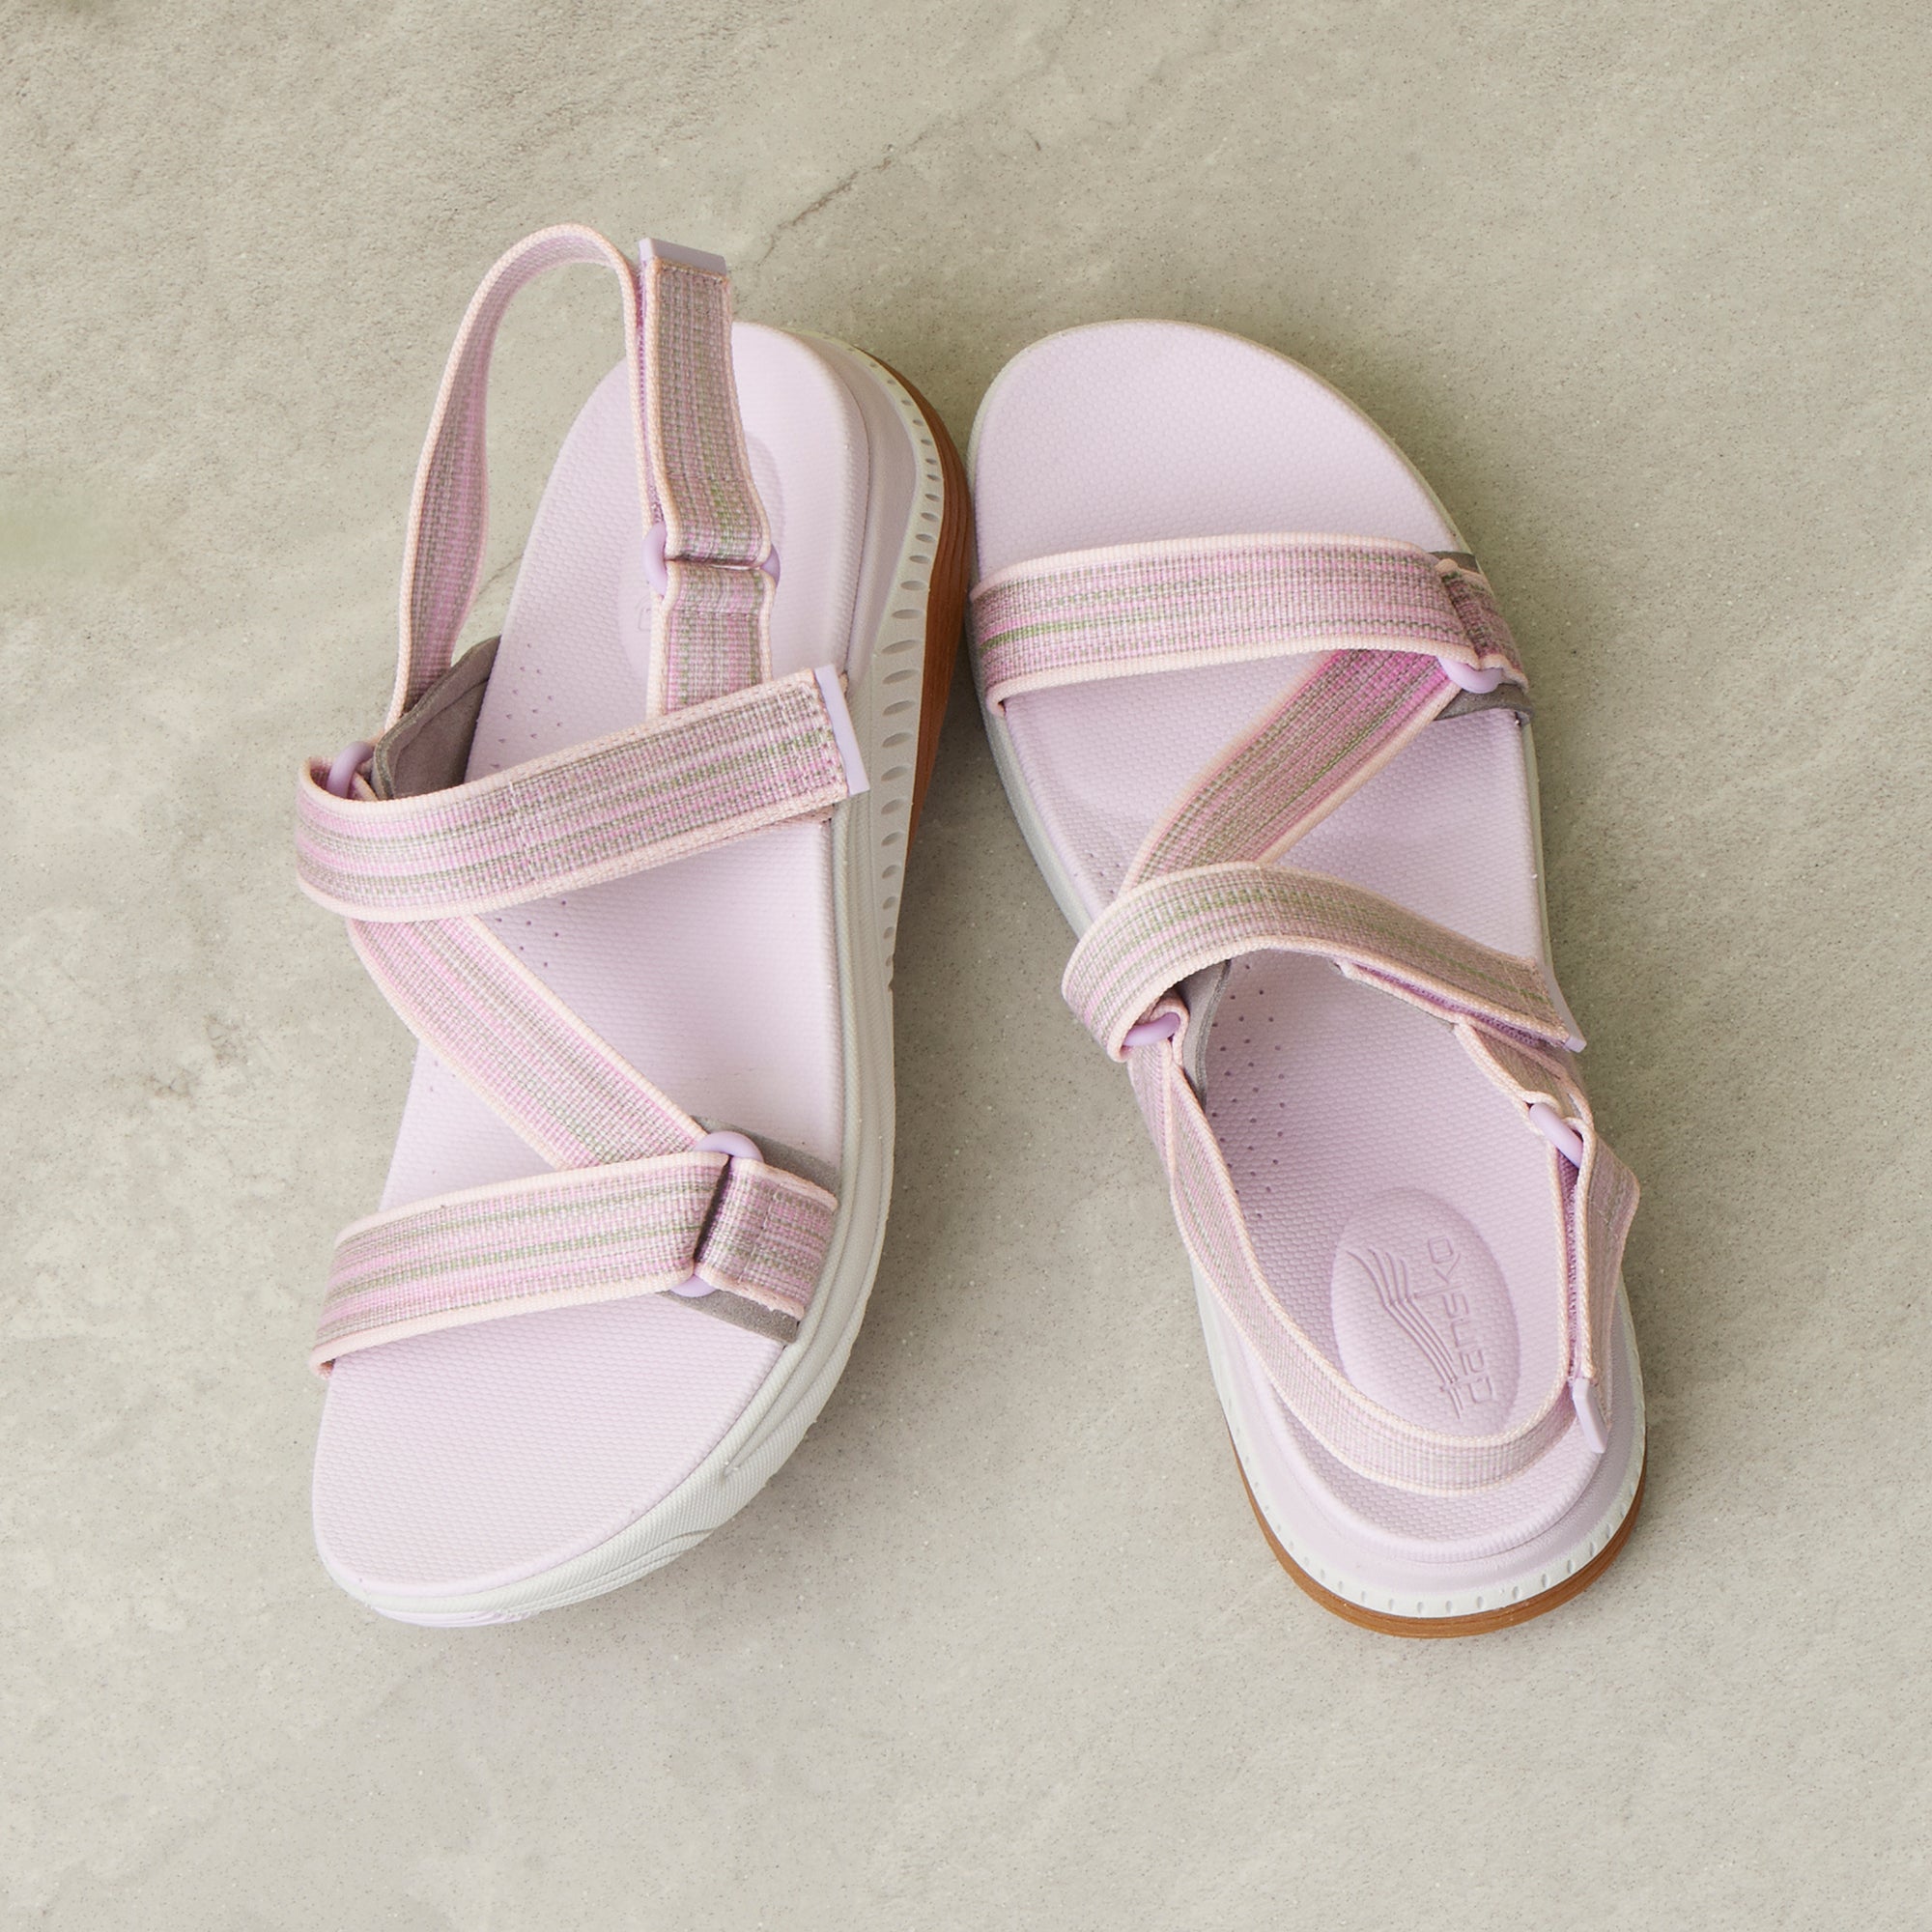 A detailed footbed and strap image of pink walking sandals.